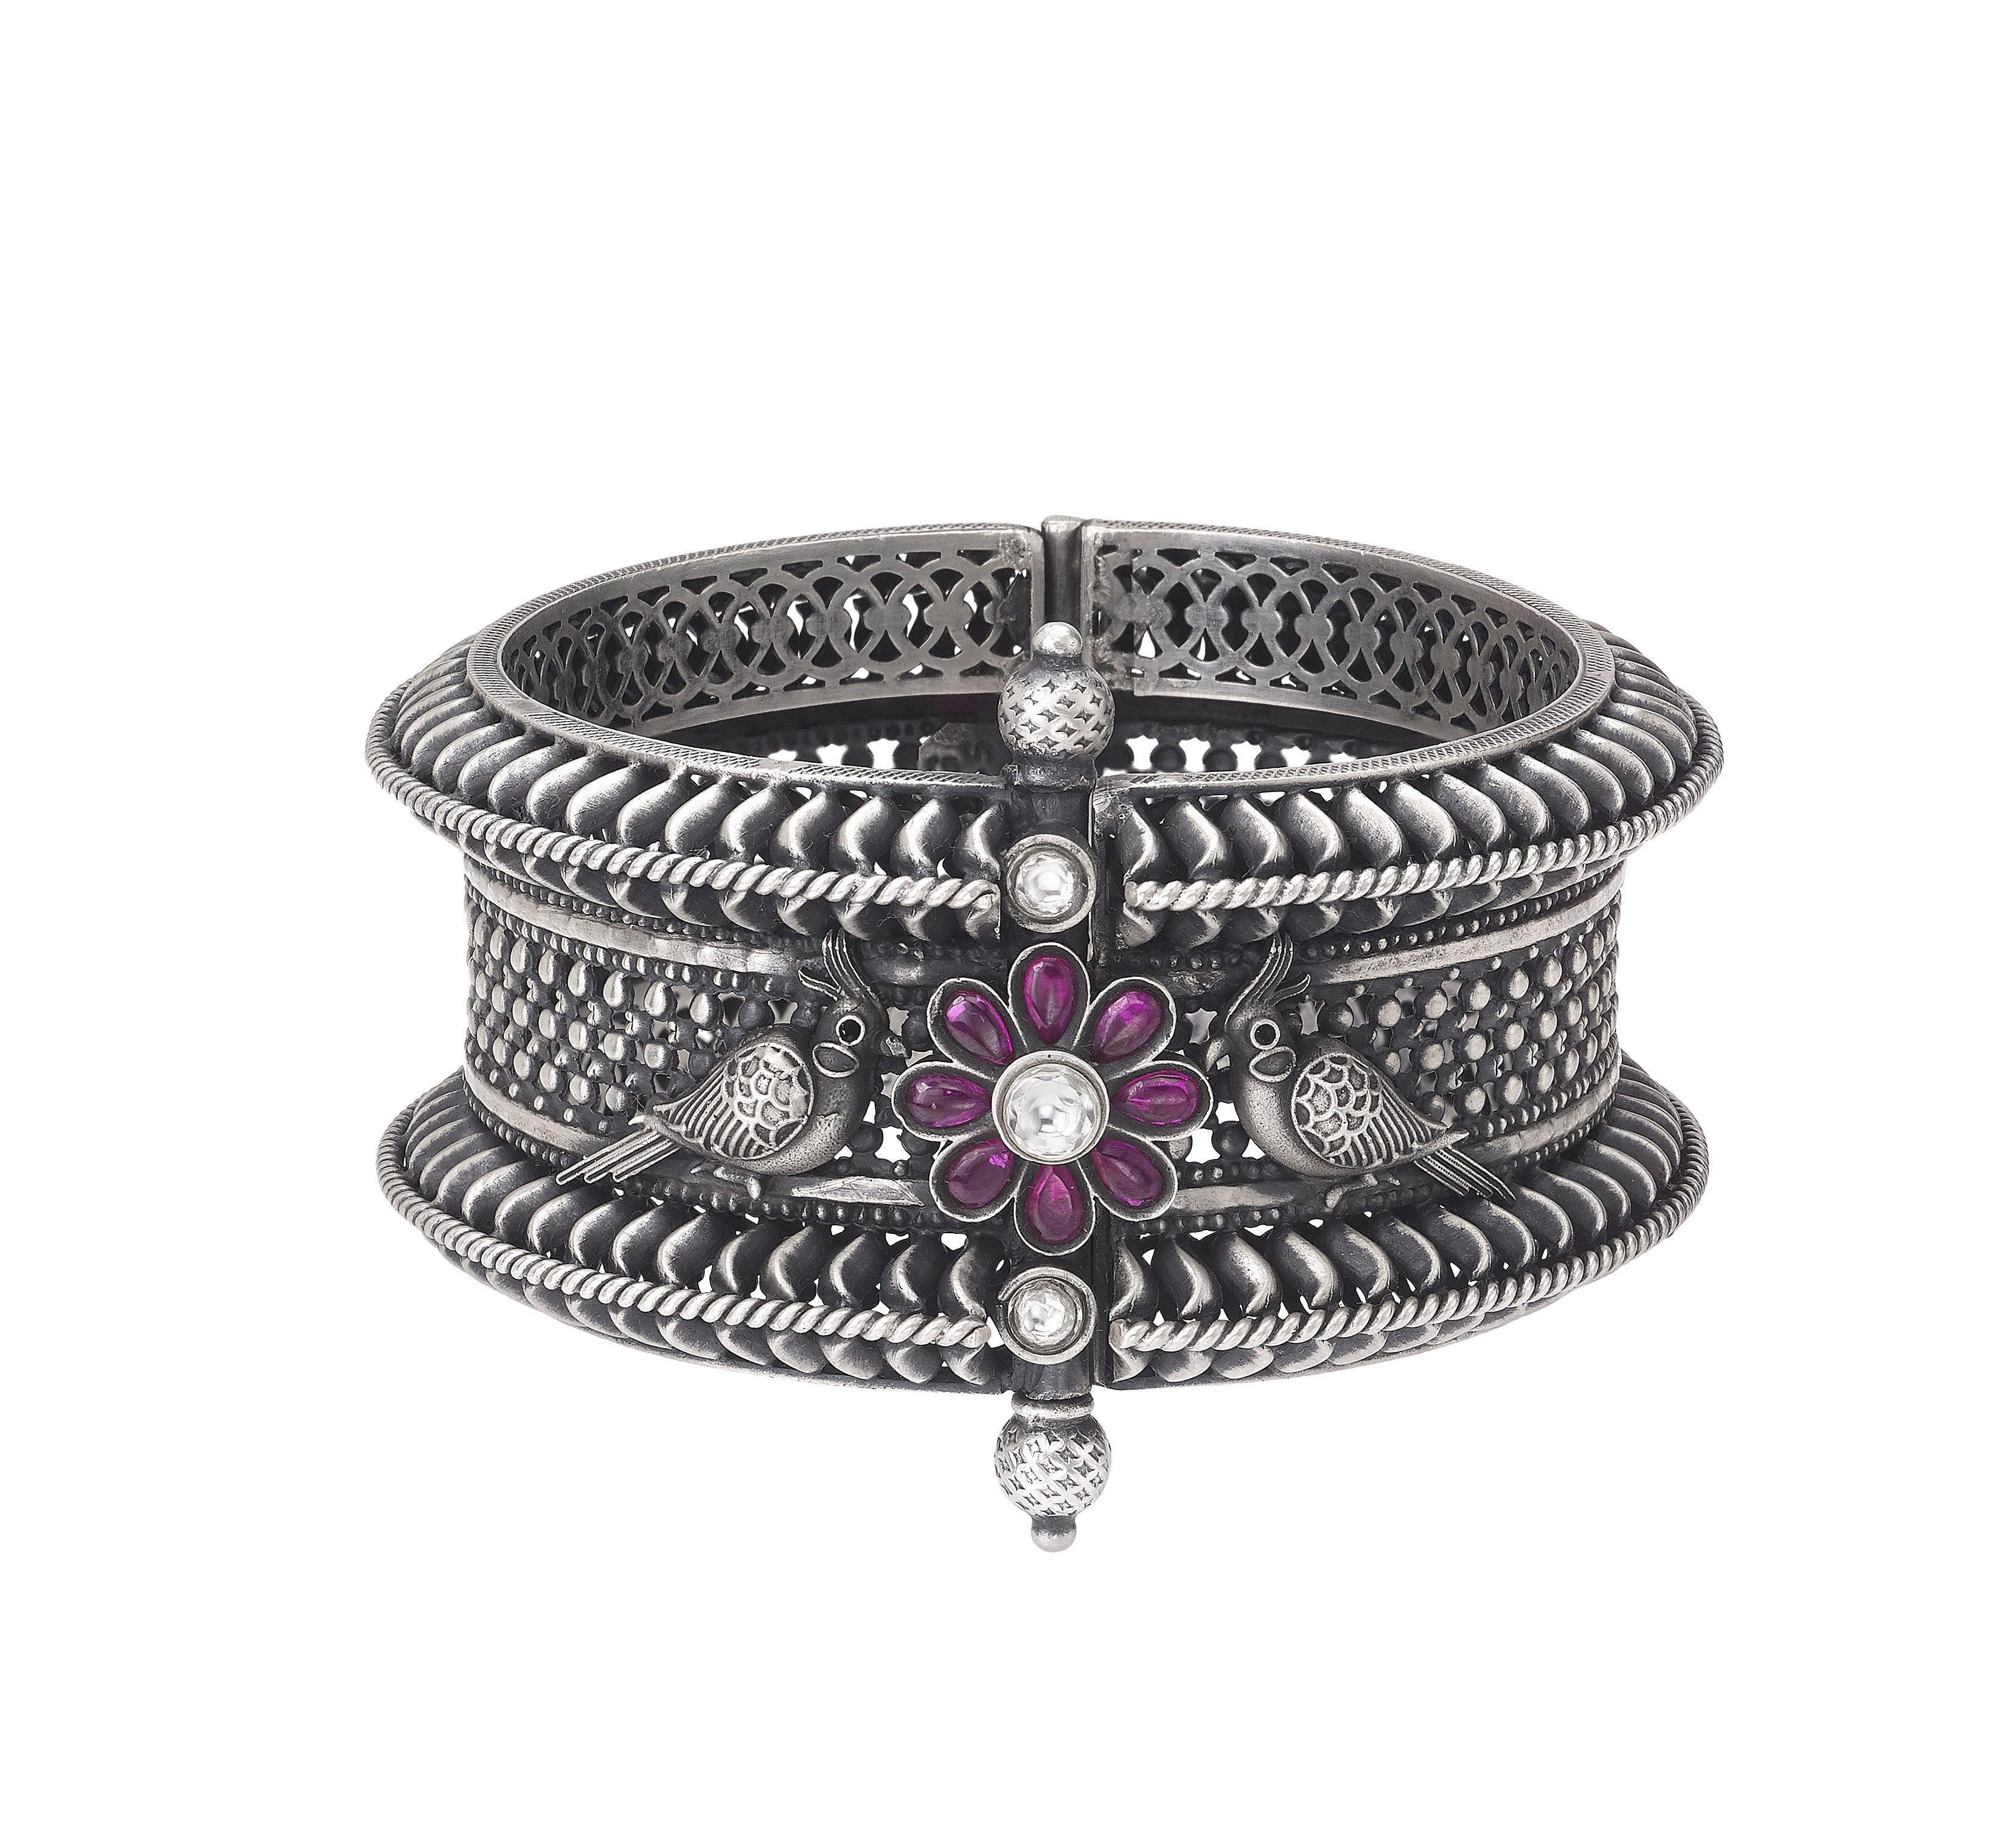 Handcrafted Bangle with Floral Motifs